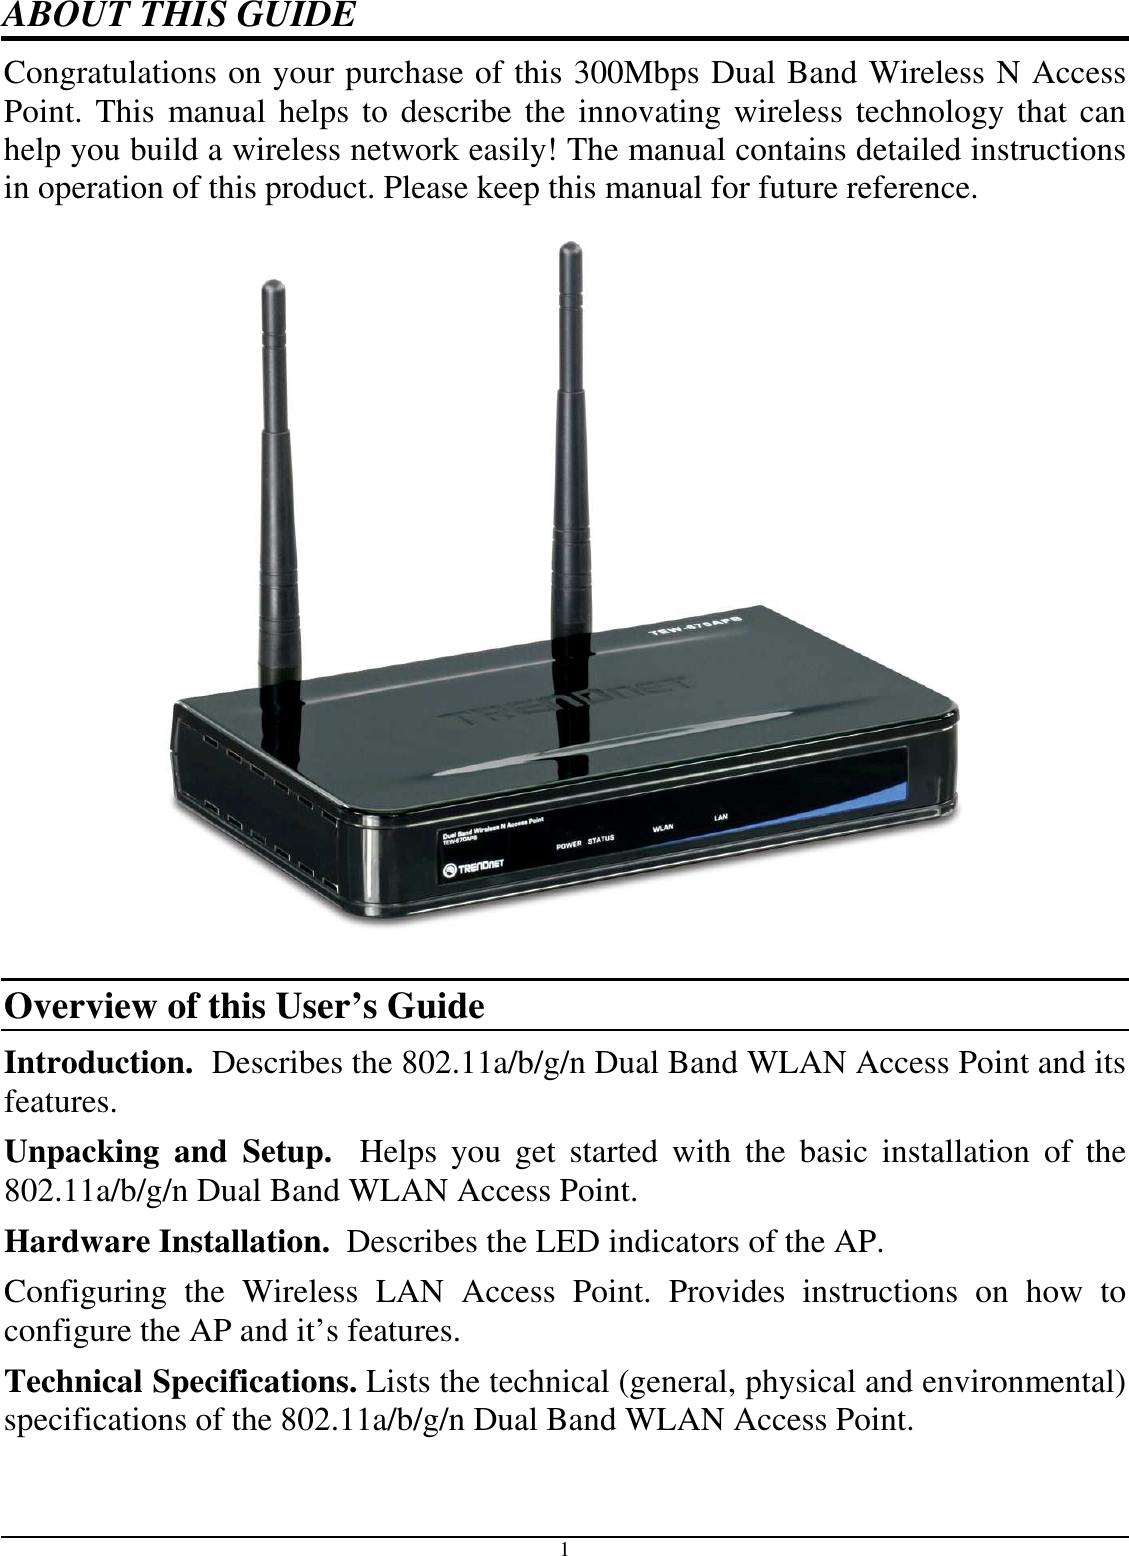 1 ABOUT THIS GUIDE Congratulations on your purchase of this 300Mbps Dual Band Wireless N Access Point. This manual helps to describe the innovating wireless technology that can help you build a wireless network easily! The manual contains detailed instructions in operation of this product. Please keep this manual for future reference.            Overview of this User’s Guide Introduction.  Describes the 802.11a/b/g/n Dual Band WLAN Access Point and its features. Unpacking  and  Setup.    Helps  you  get  started  with  the  basic  installation  of  the 802.11a/b/g/n Dual Band WLAN Access Point. Hardware Installation.  Describes the LED indicators of the AP. Configuring  the  Wireless  LAN  Access  Point.  Provides  instructions  on  how  to configure the AP and it’s features.  Technical Specifications. Lists the technical (general, physical and environmental) specifications of the 802.11a/b/g/n Dual Band WLAN Access Point. 